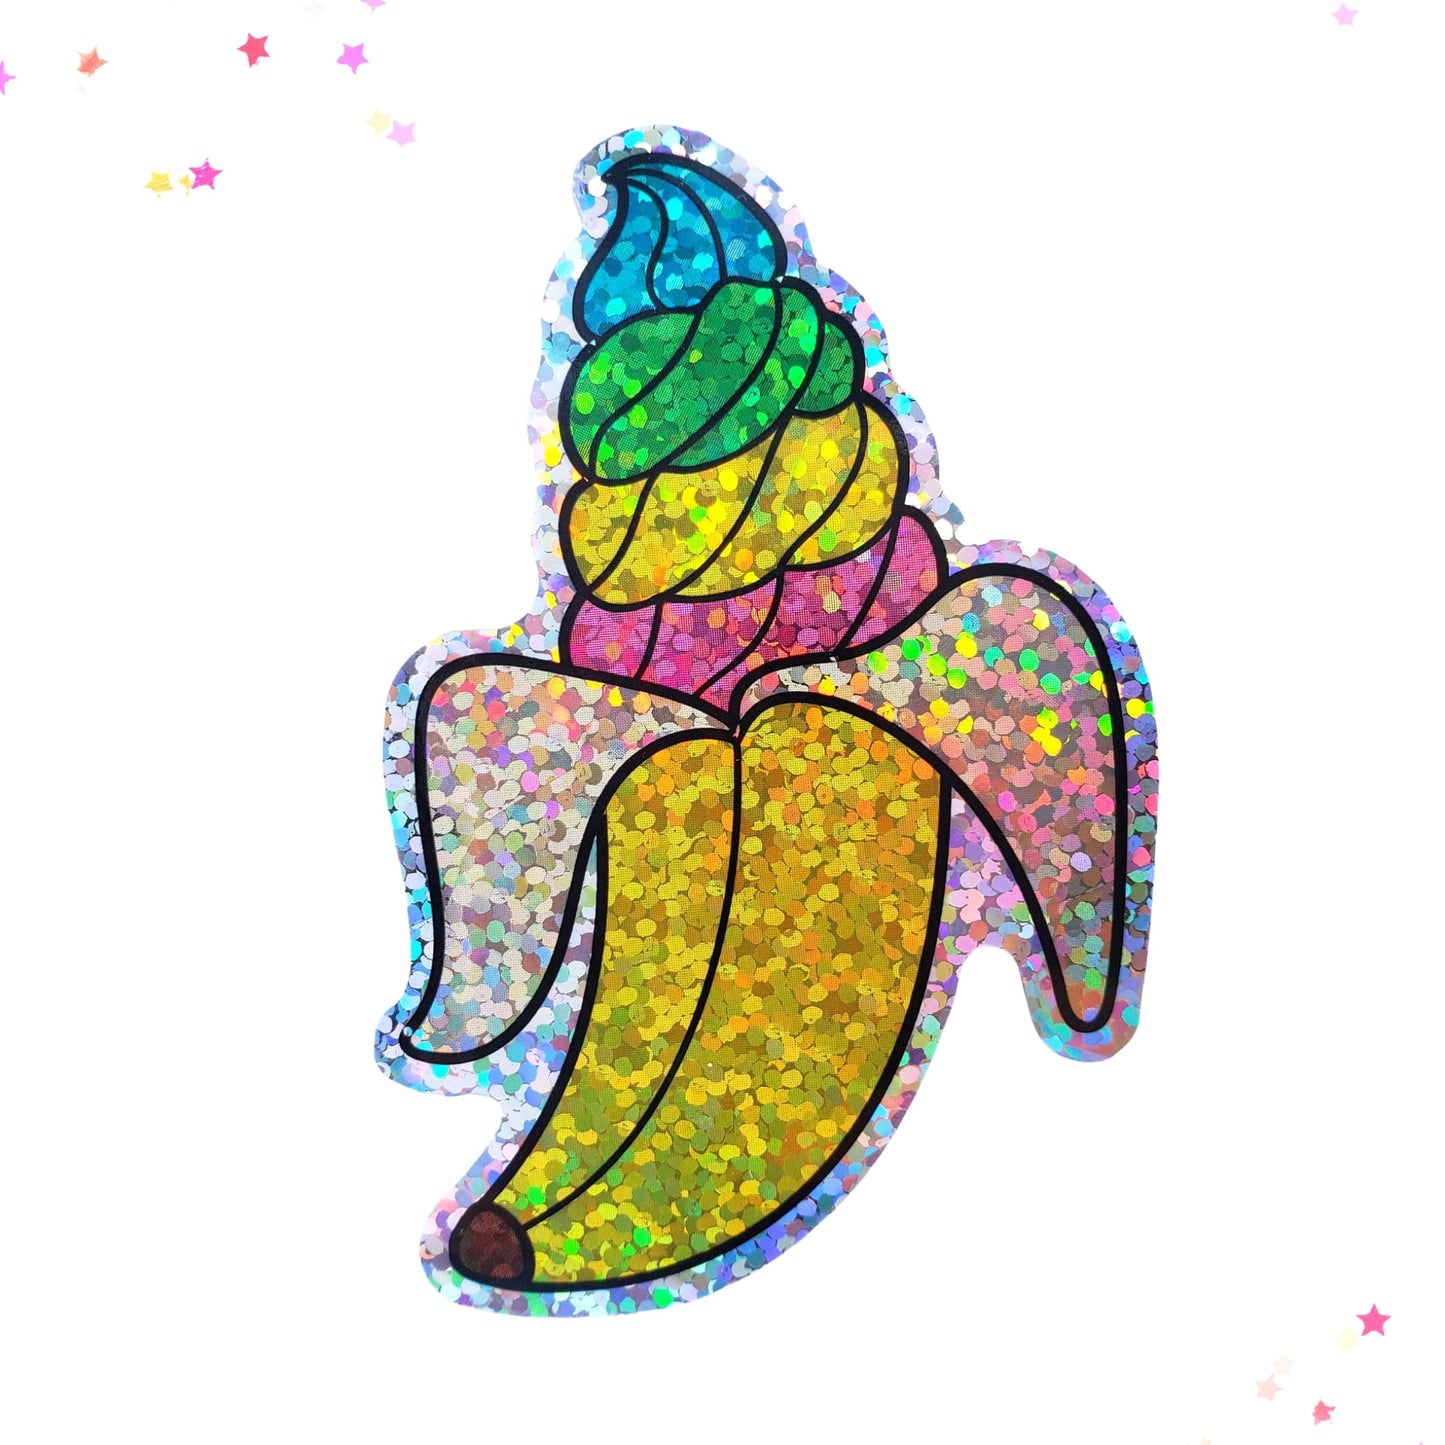 Premium Sticker - Sparkly Holographic Glitter Fro-Yo Banana Split from Confetti Kitty, Only 2.00